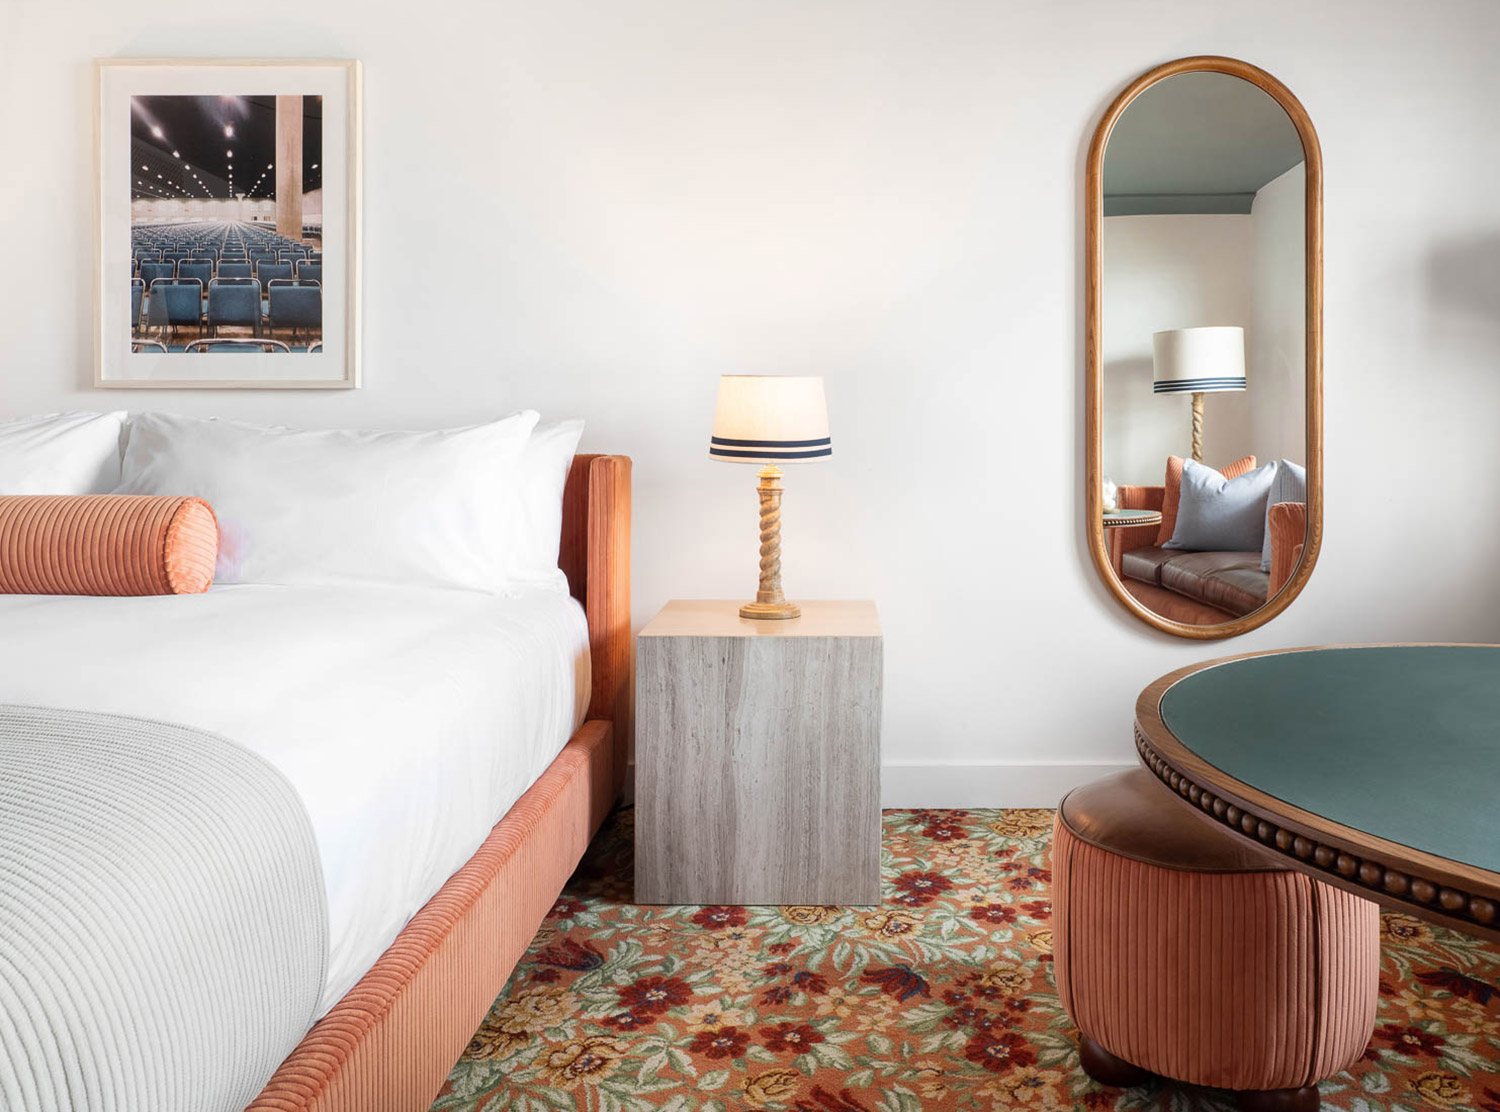 Palihouse West Hollywood has bespoke furniture in each of its 95 rooms